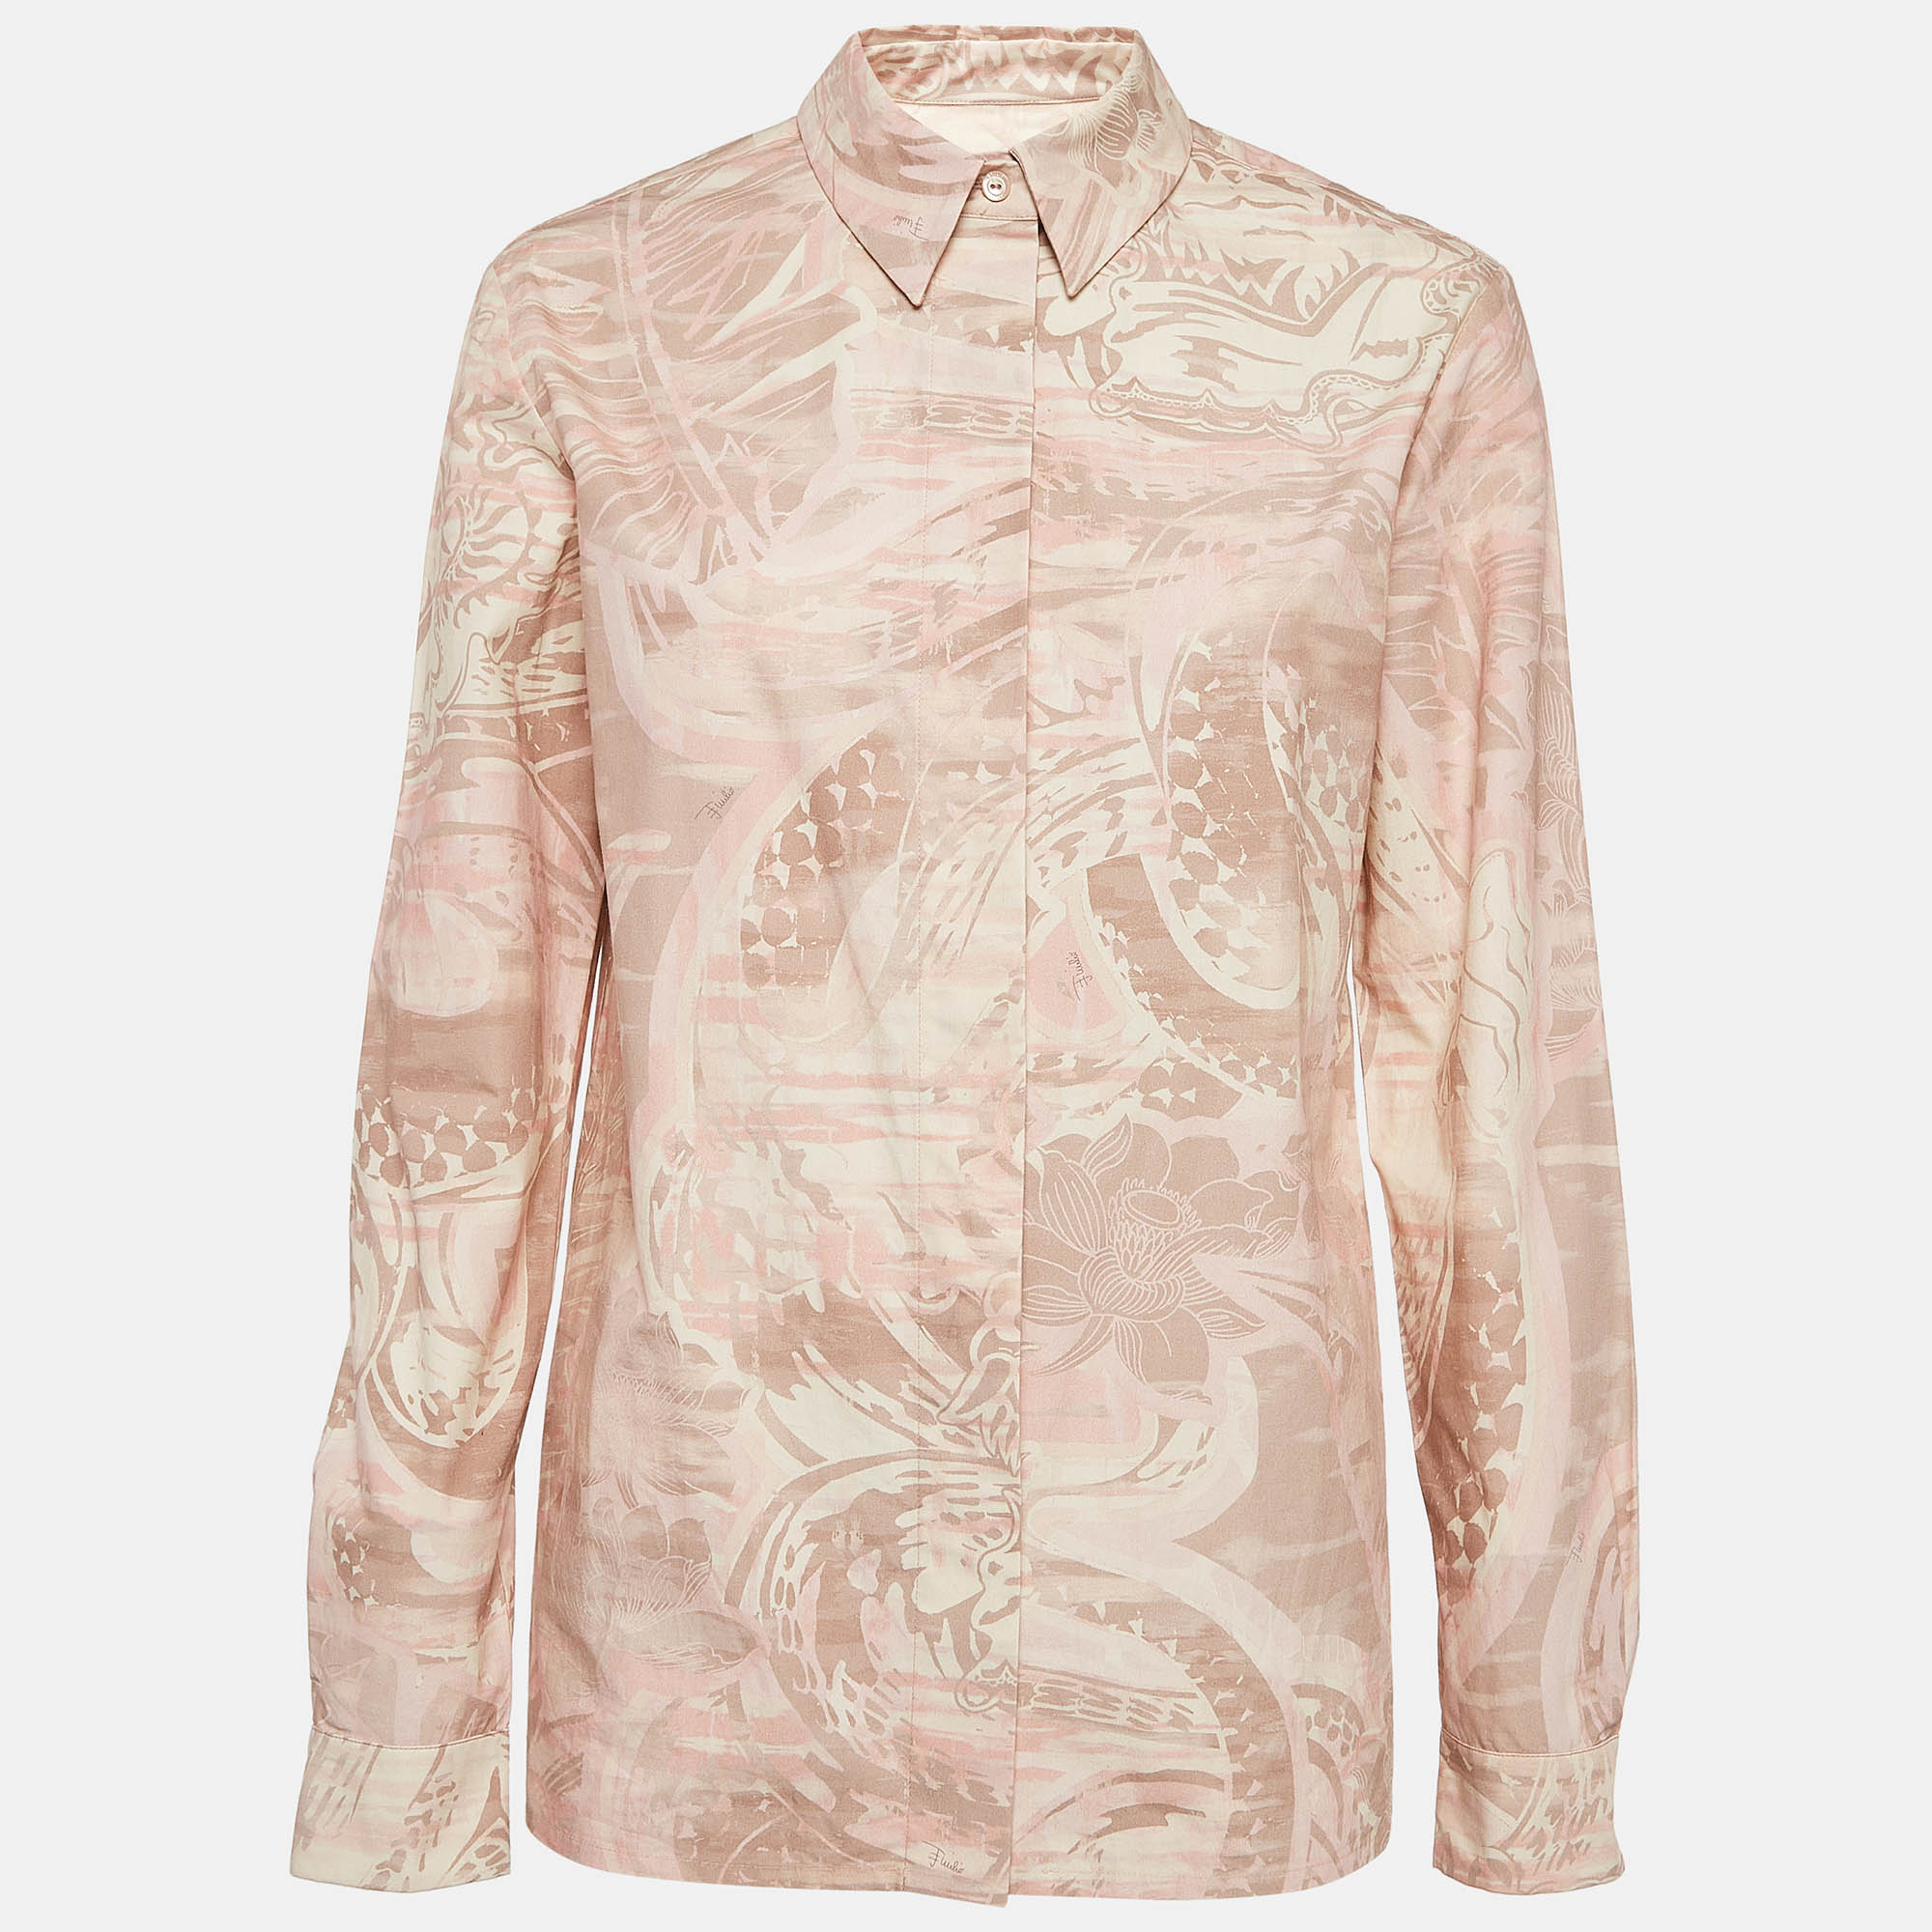 

Emilio Pucci Printed Cotton Long Sleeve Shirt S, Pink